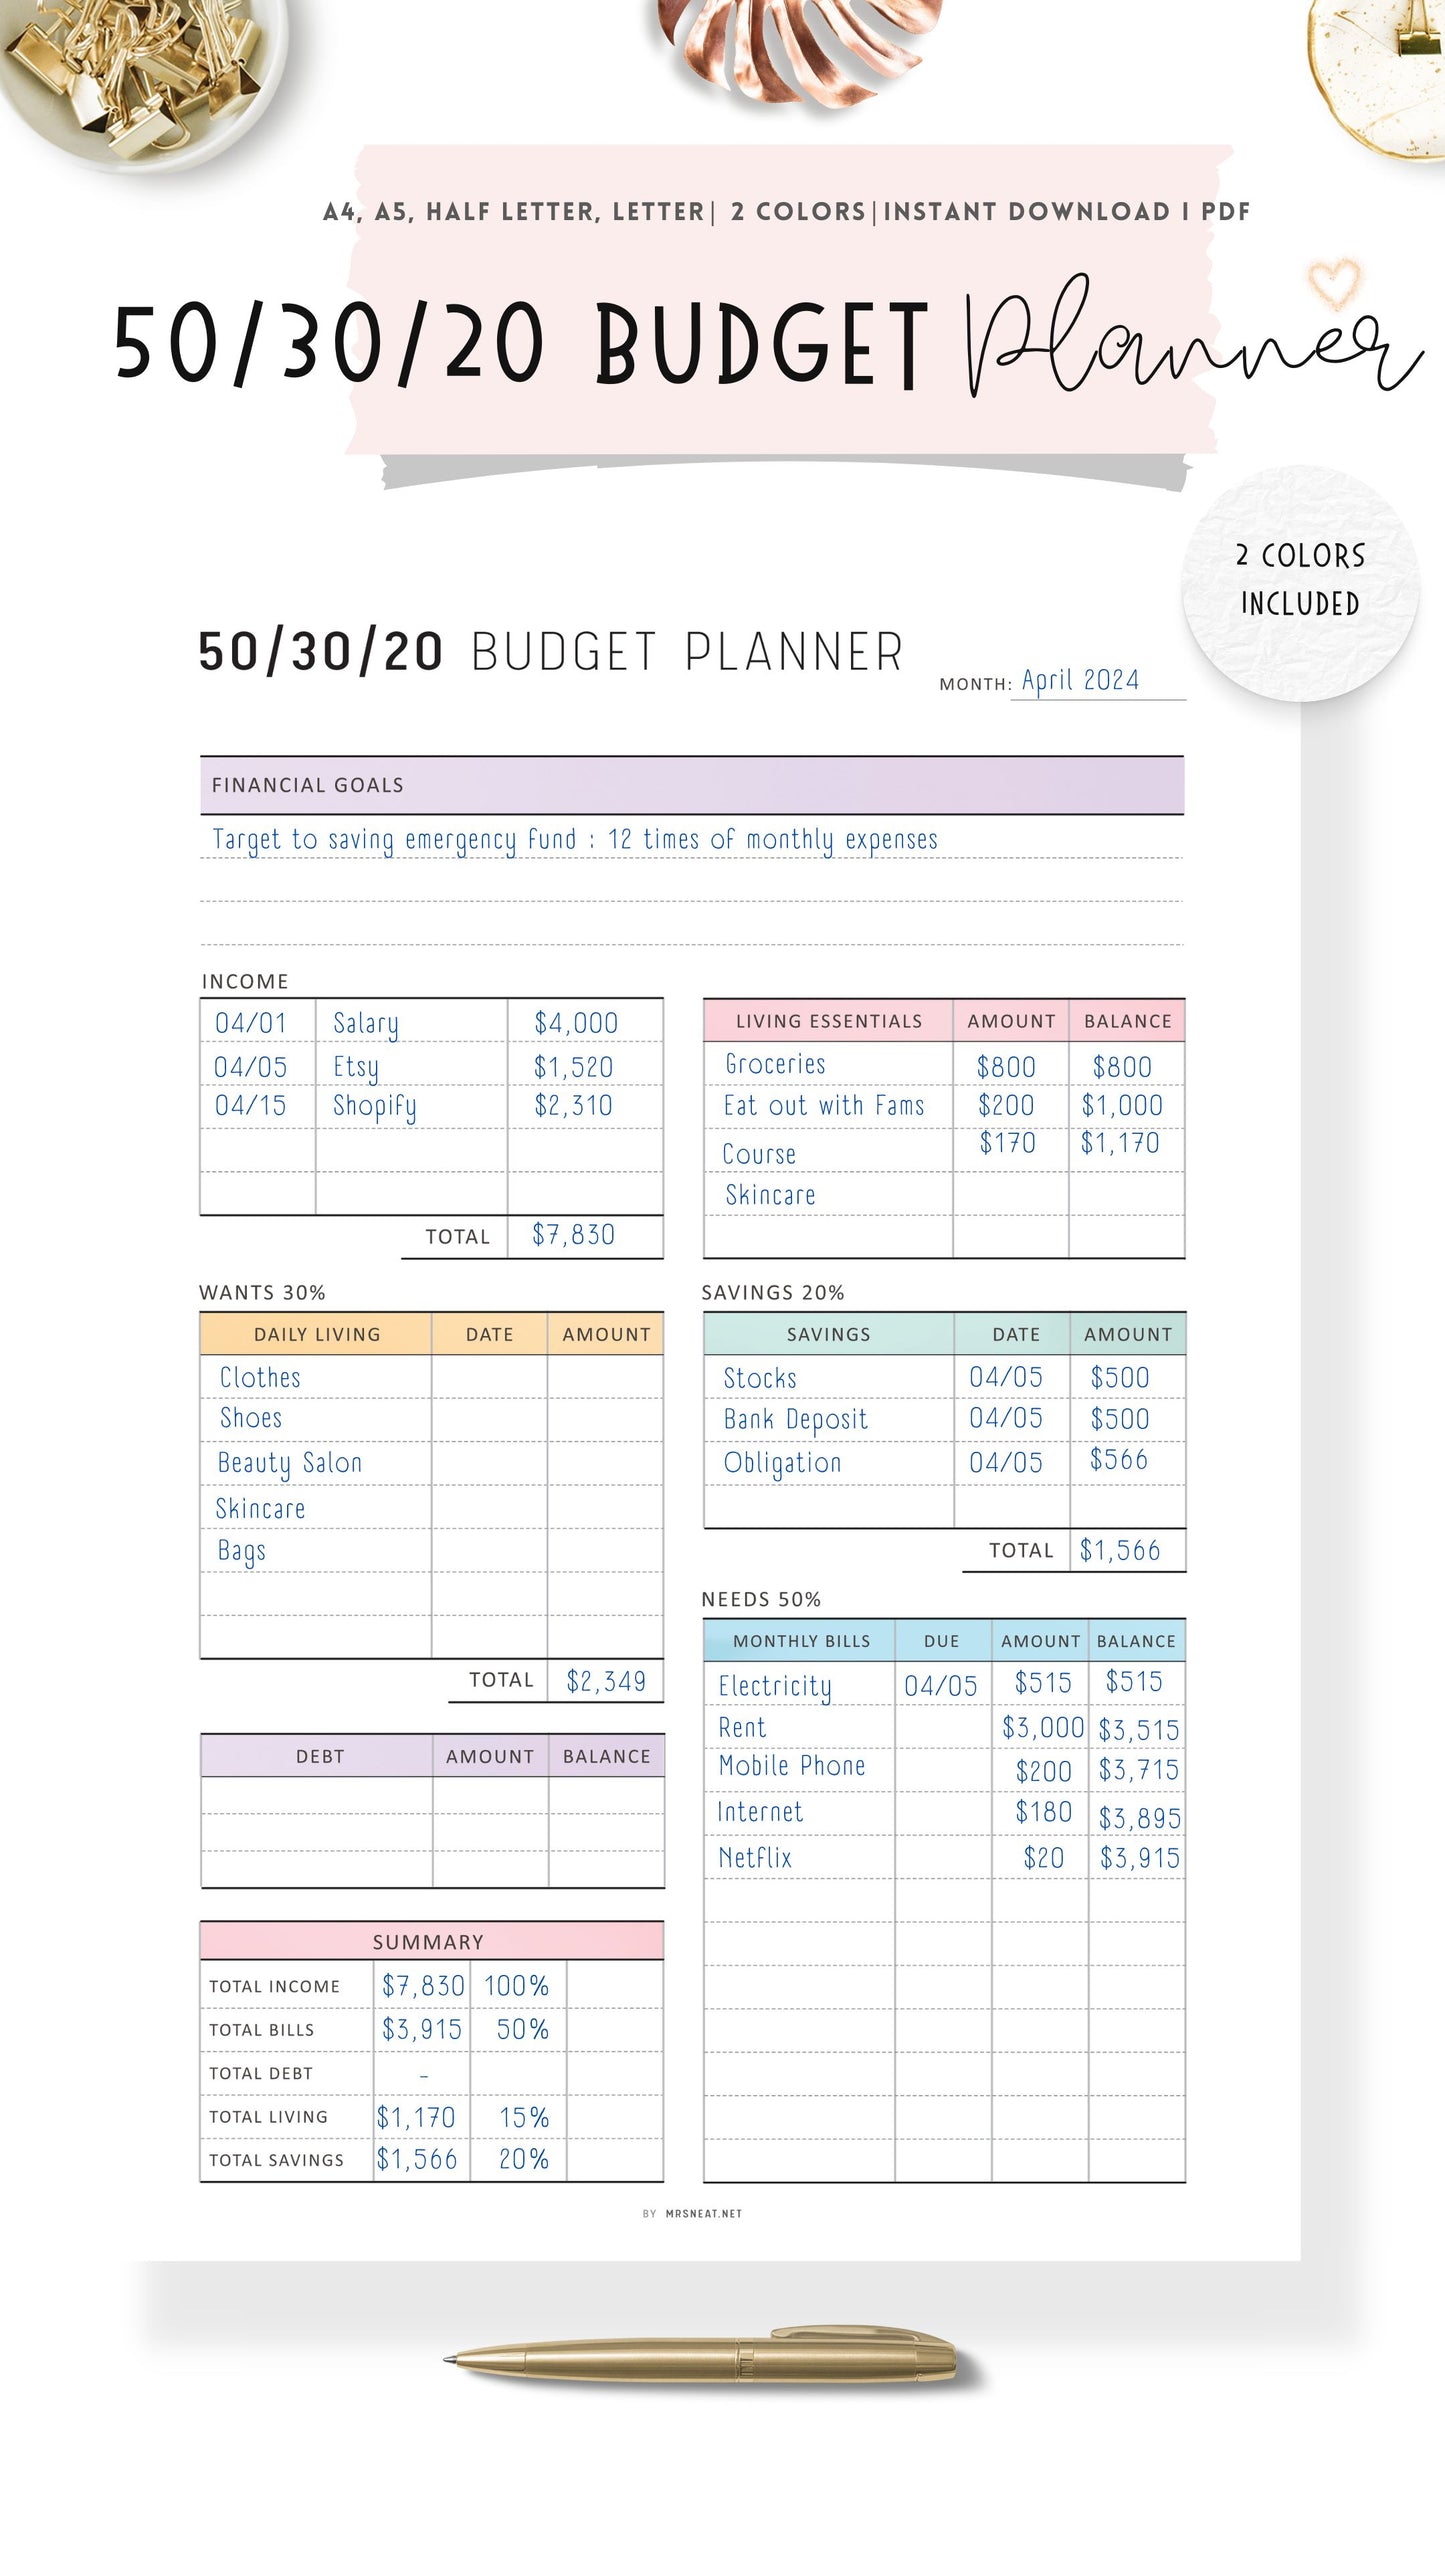 Cute 50/30/20 Budget Tracker Template Printable, Monthly Budget Planner, Colorful Page, Digital Budget Planner, A4, A5, Letter, Half Letter, PDF